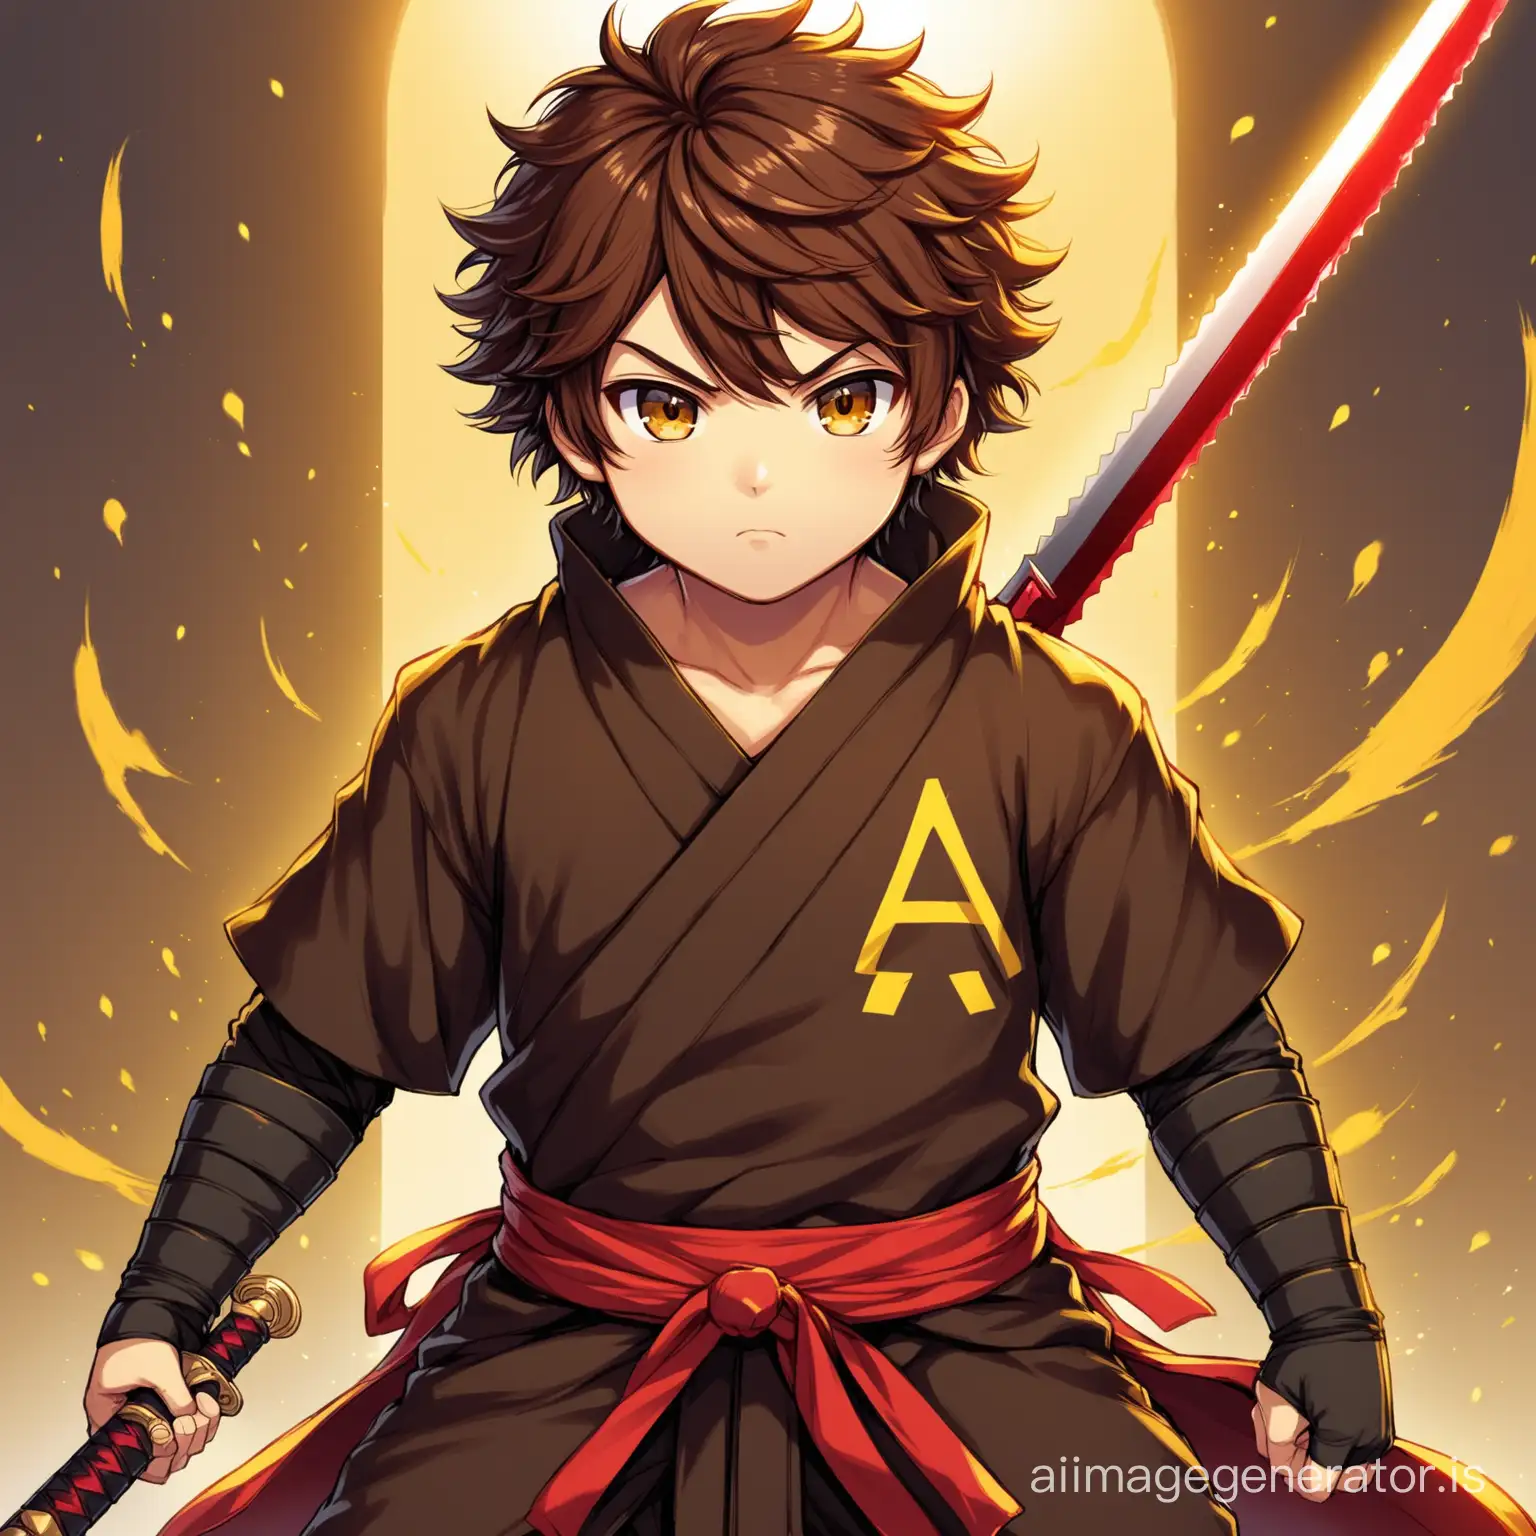 Adventurous-Ninja-Boy-with-Brown-Fluffy-Hair-and-Red-Sword